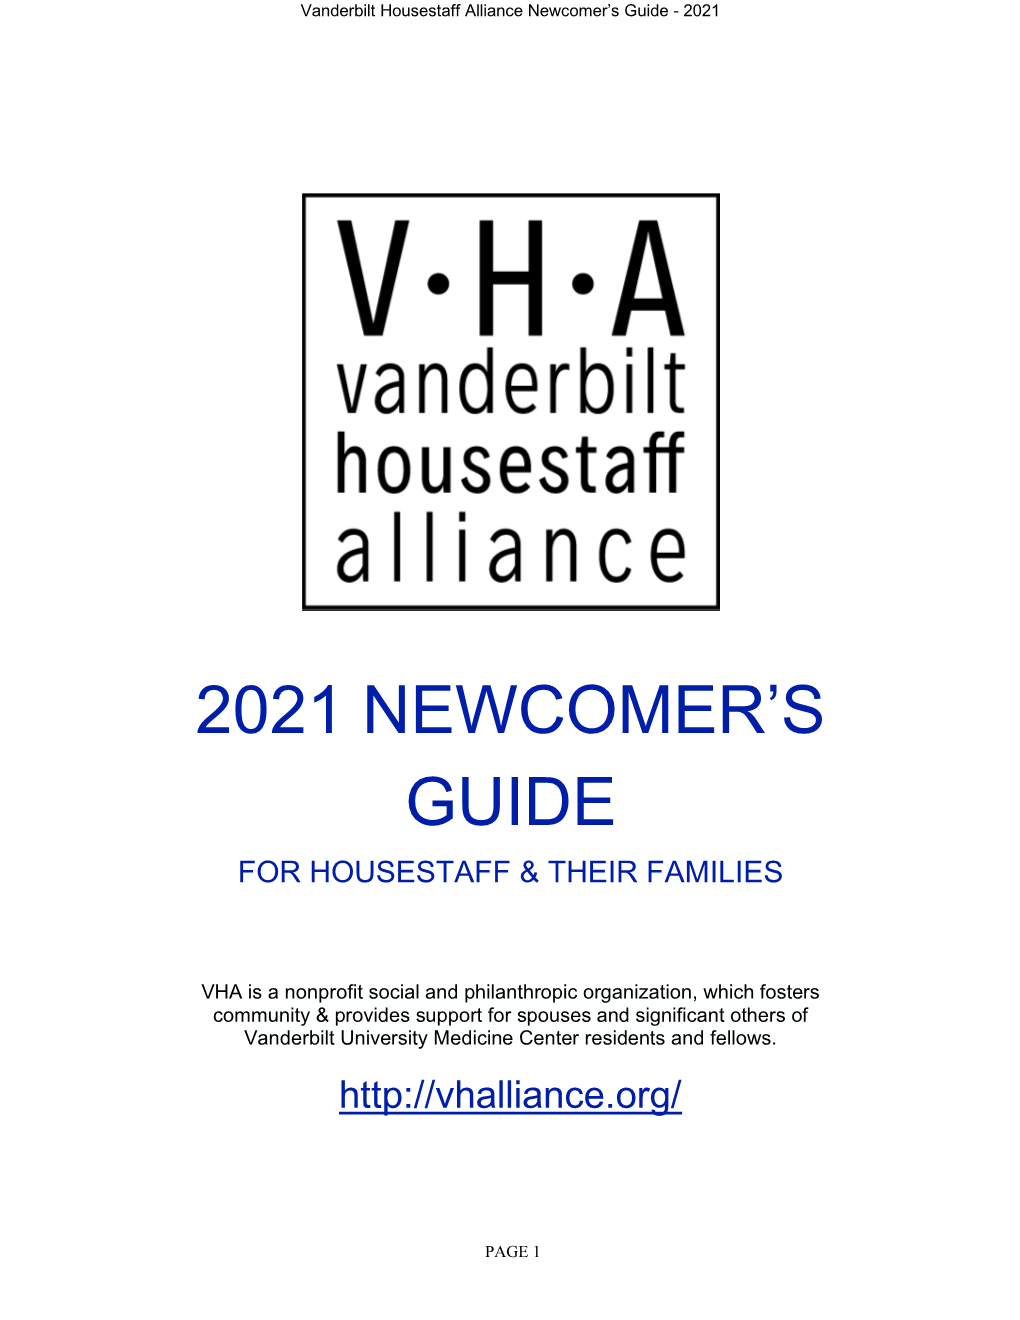 2021 Newcomer's Guide